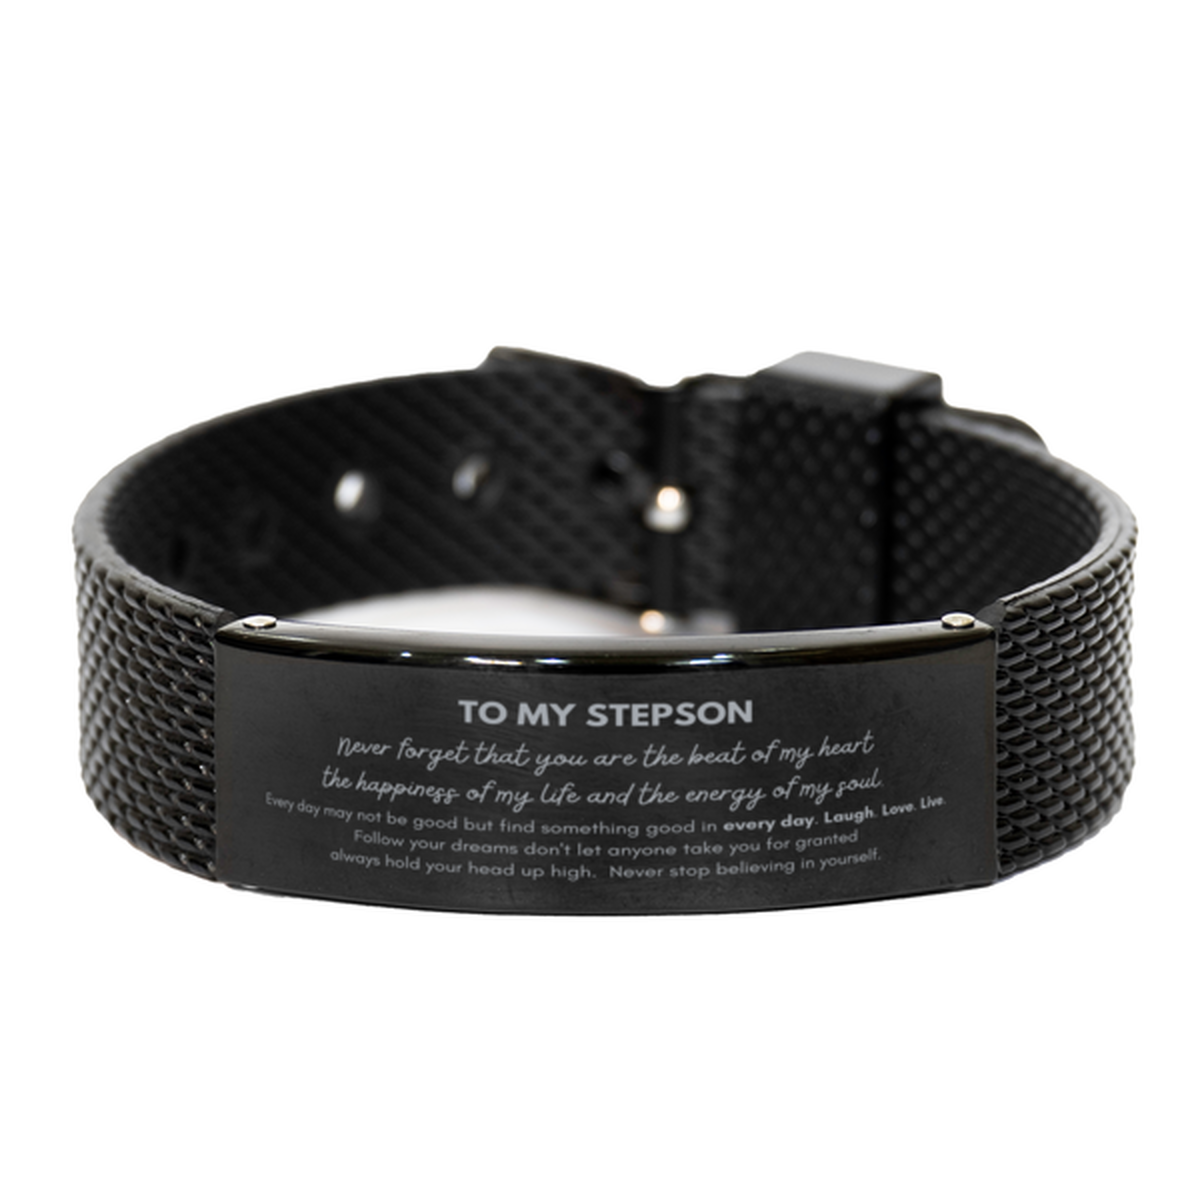 To My Stepson Bracelet Gifts, Christmas Stepson Black Shark Mesh Bracelet Present, Birthday Unique Motivational For Stepson, To My Stepson Never forget that you are the beat of my heart the happiness of my life and the energy of my soul